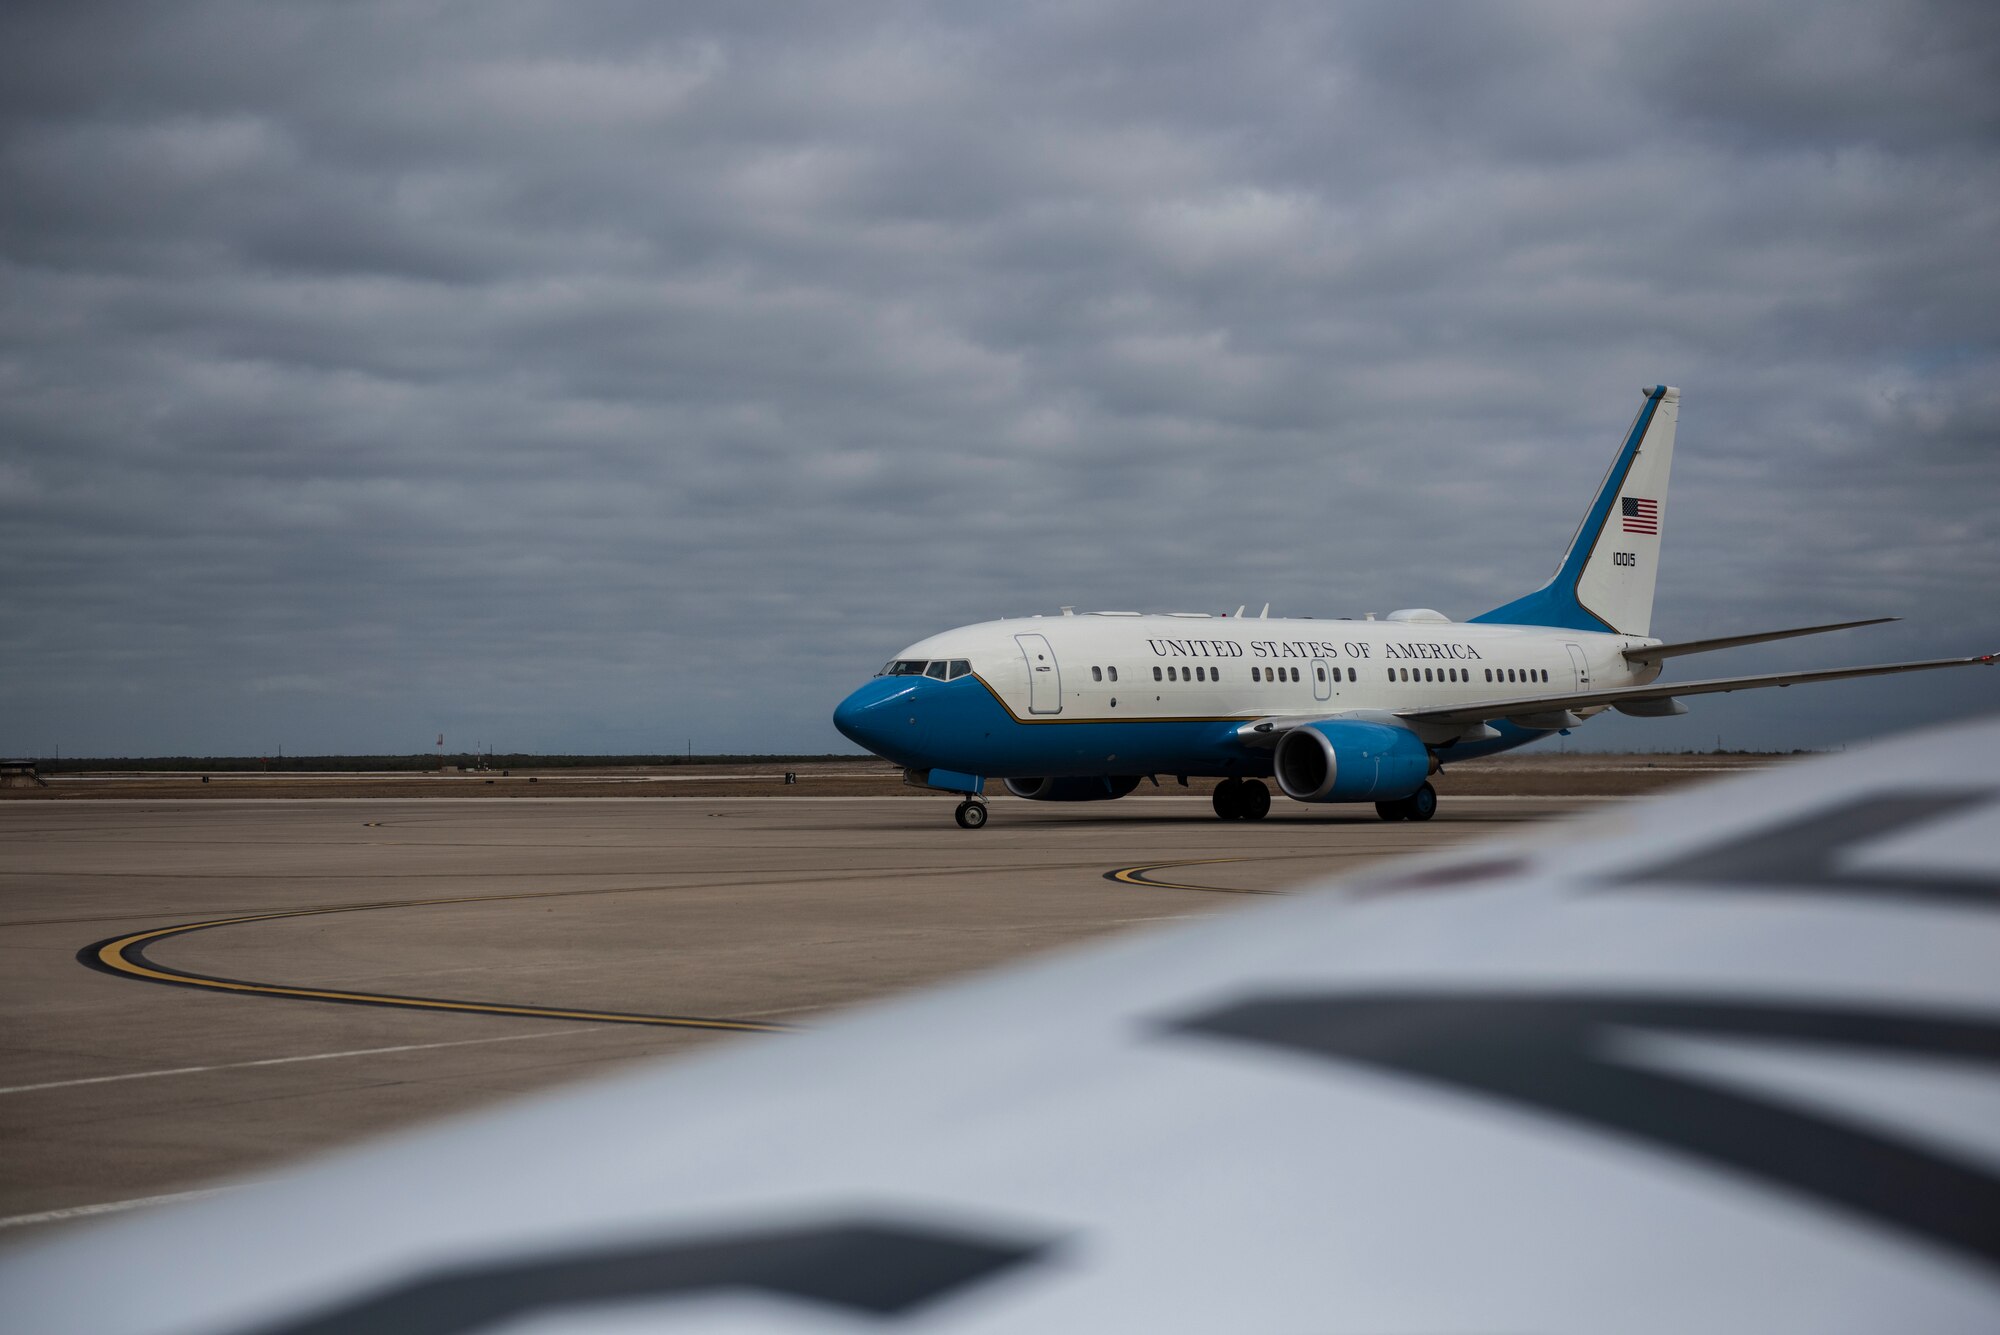 A C-40B from the 89th Airlift Wing at Joint Base Andrews, Md., lands at Laughlin Air Force Base, Texas, on Nov. 18, 2020. Officer and enlisted Airmen from the 89th AW traveled here to recruit personnel for positions at their wing including pilots, navigators, flight engineers, flight attendants, ect. (U.S. Air Force photo by Airman 1st Class David Phaff)